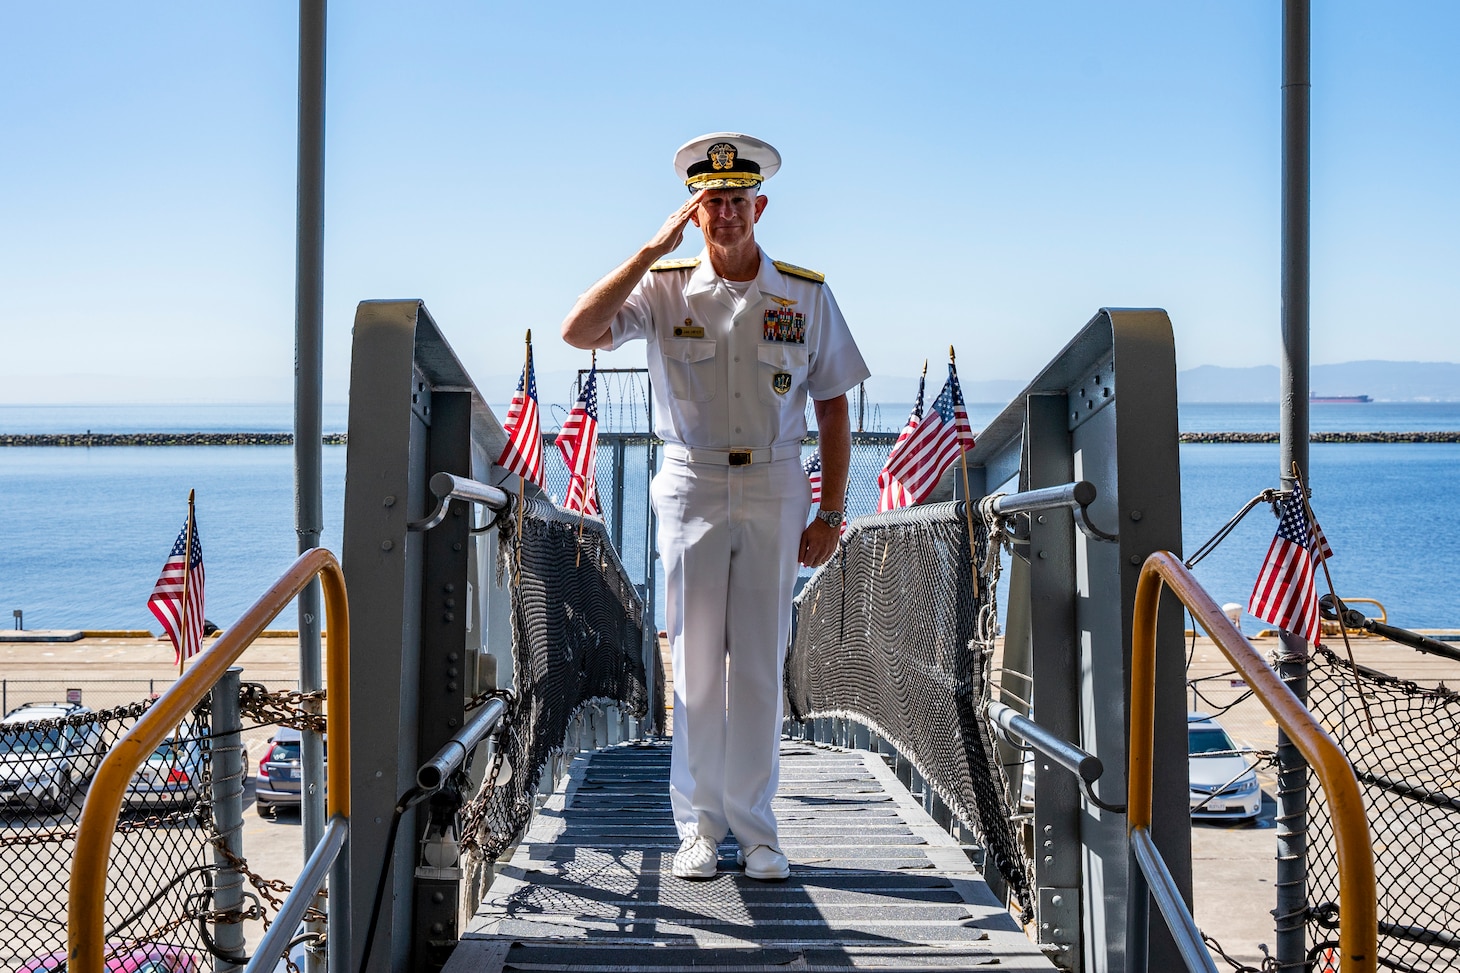 Vice Adm. Daniel Dwyer, commander, U.S. 2nd Fleet, boards the USS Hornet Sea, Air and Space Museum during the 100th Anniversary of the Aircraft Carrier ceremony in Alameda, Calif., Aug. 13.